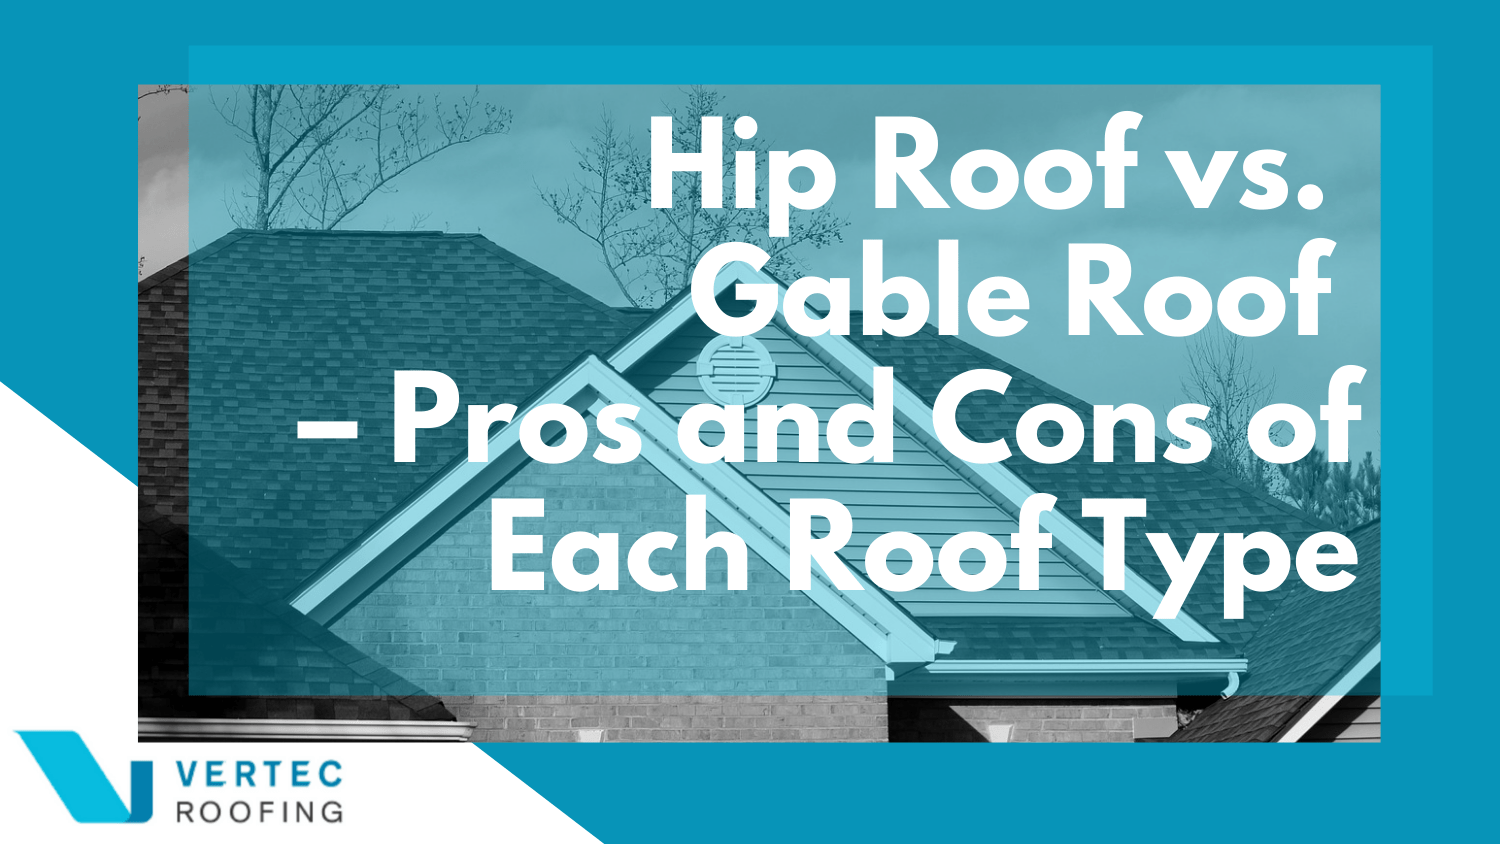 Hip Roof vs Gable Roof – Pros and Cons of Each Roof Type